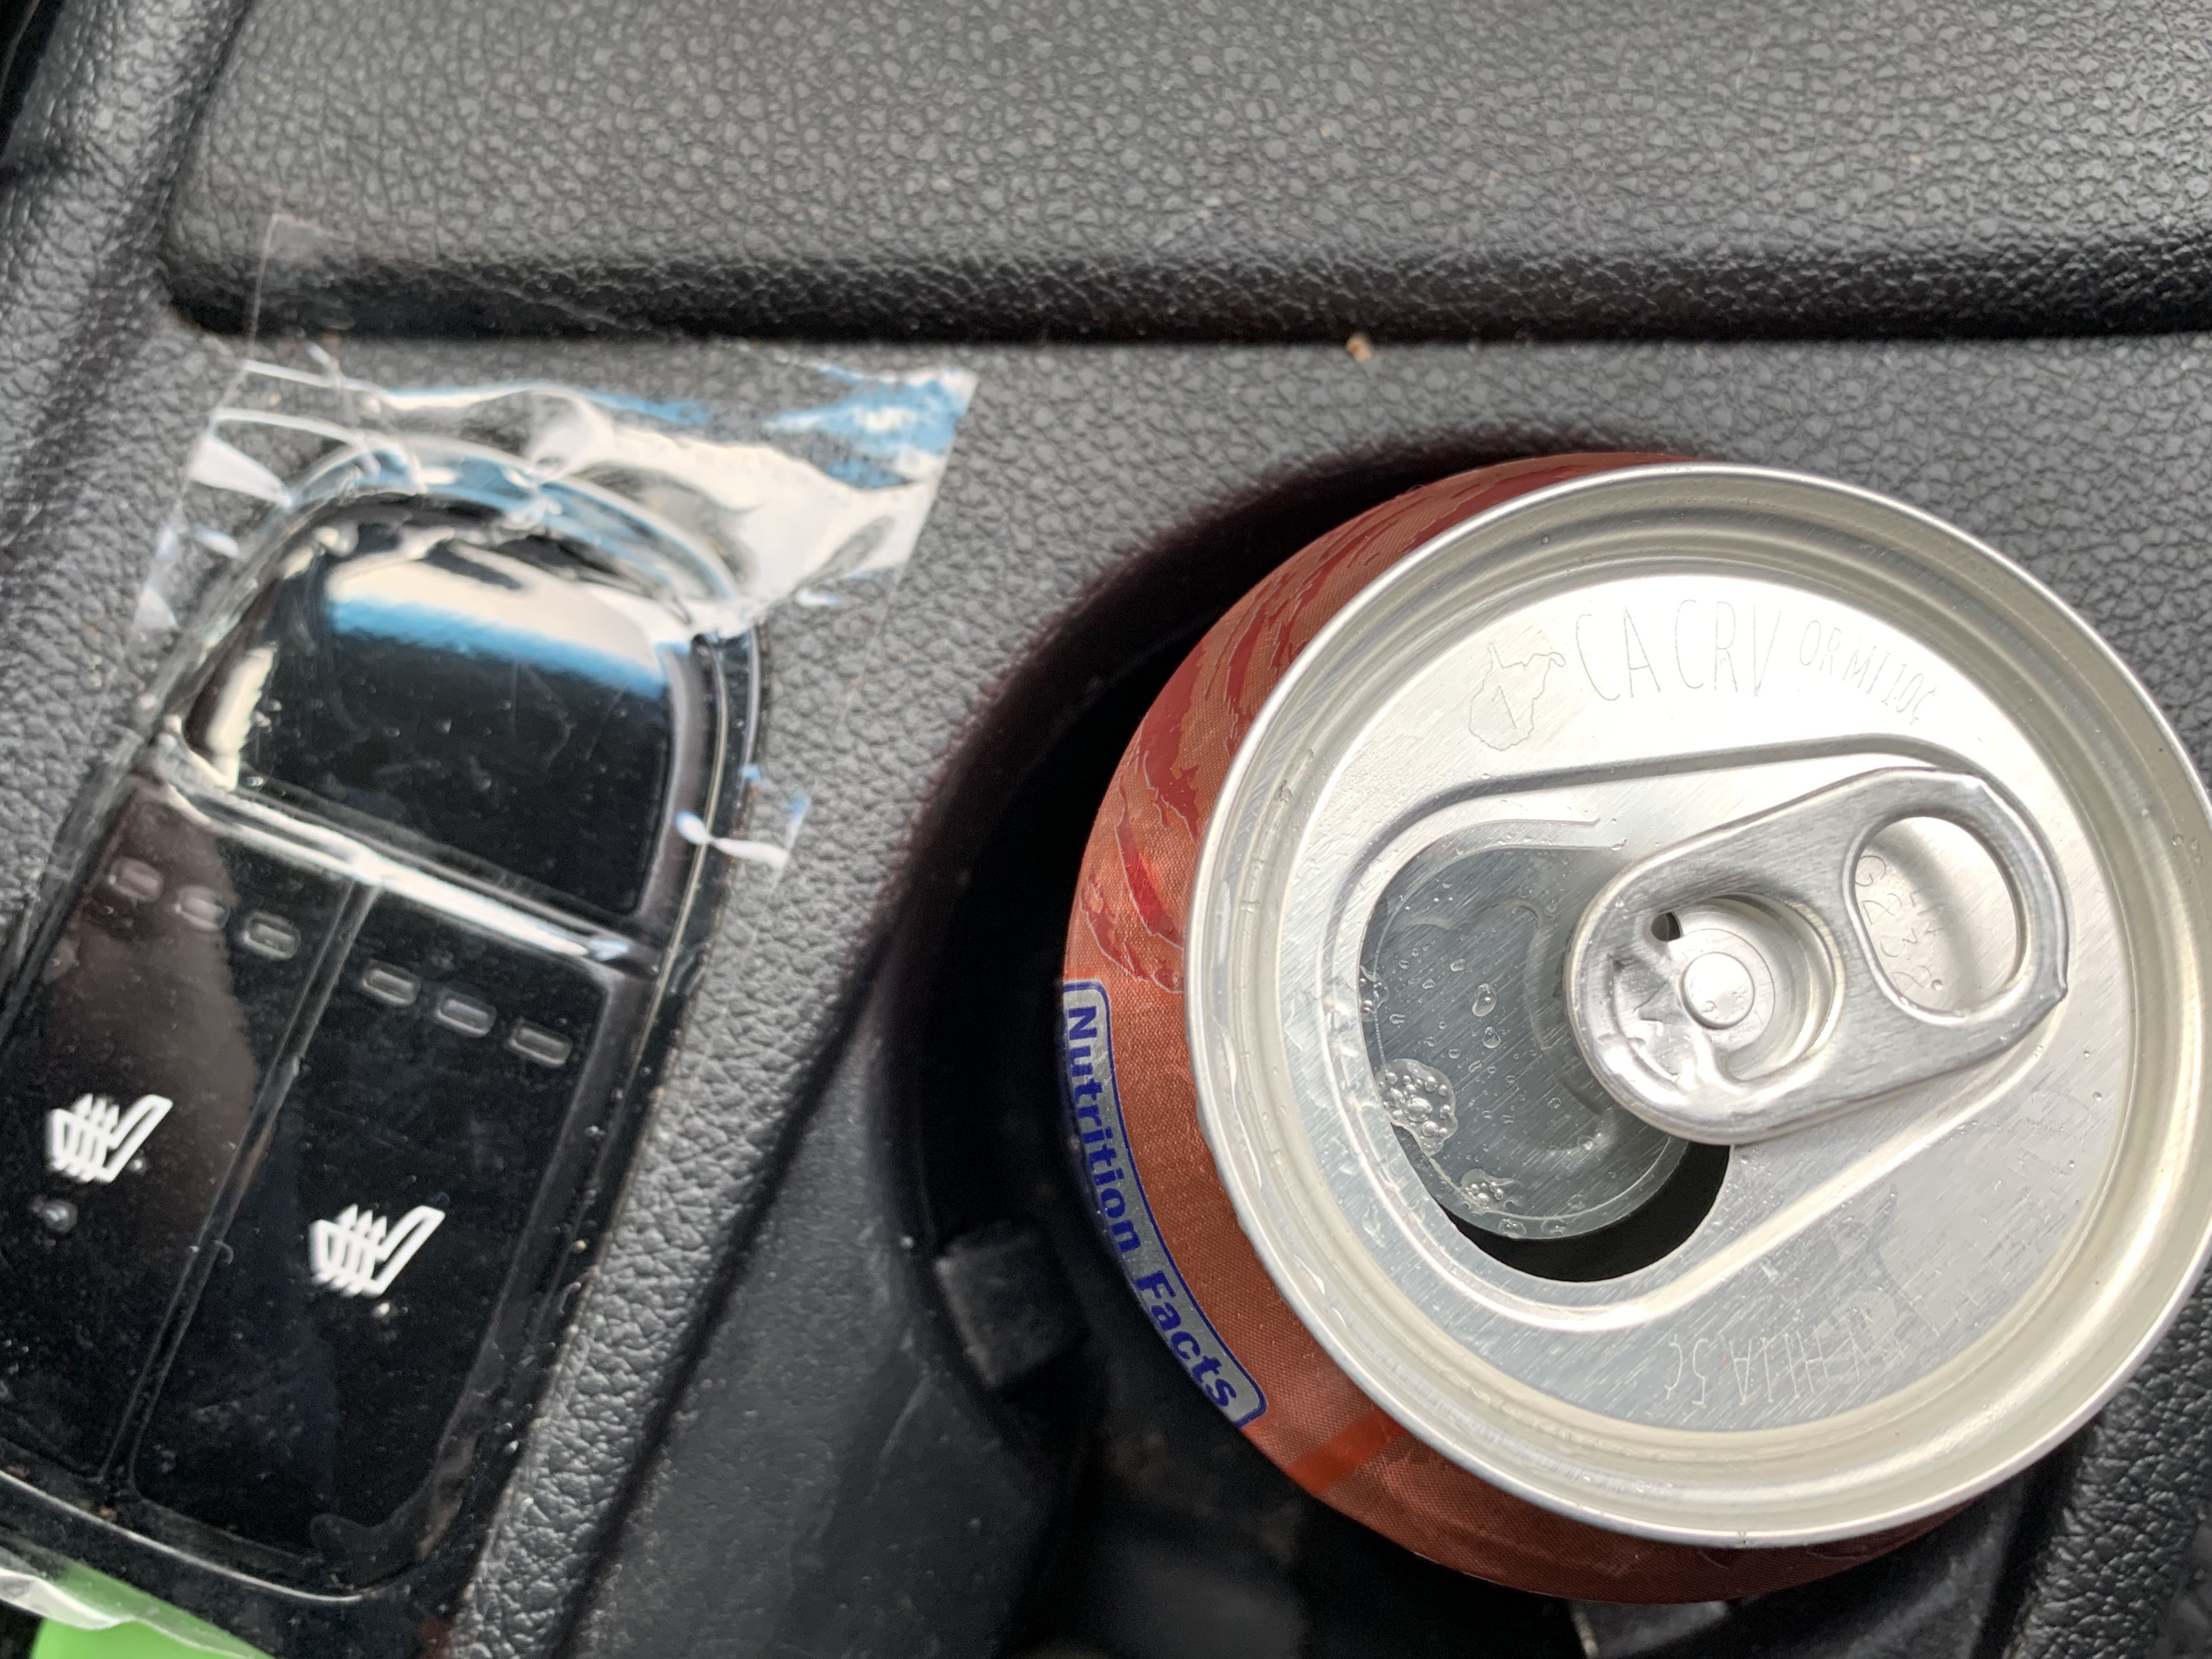 Kia Seat Heater Buttons Next to a Can of Soda